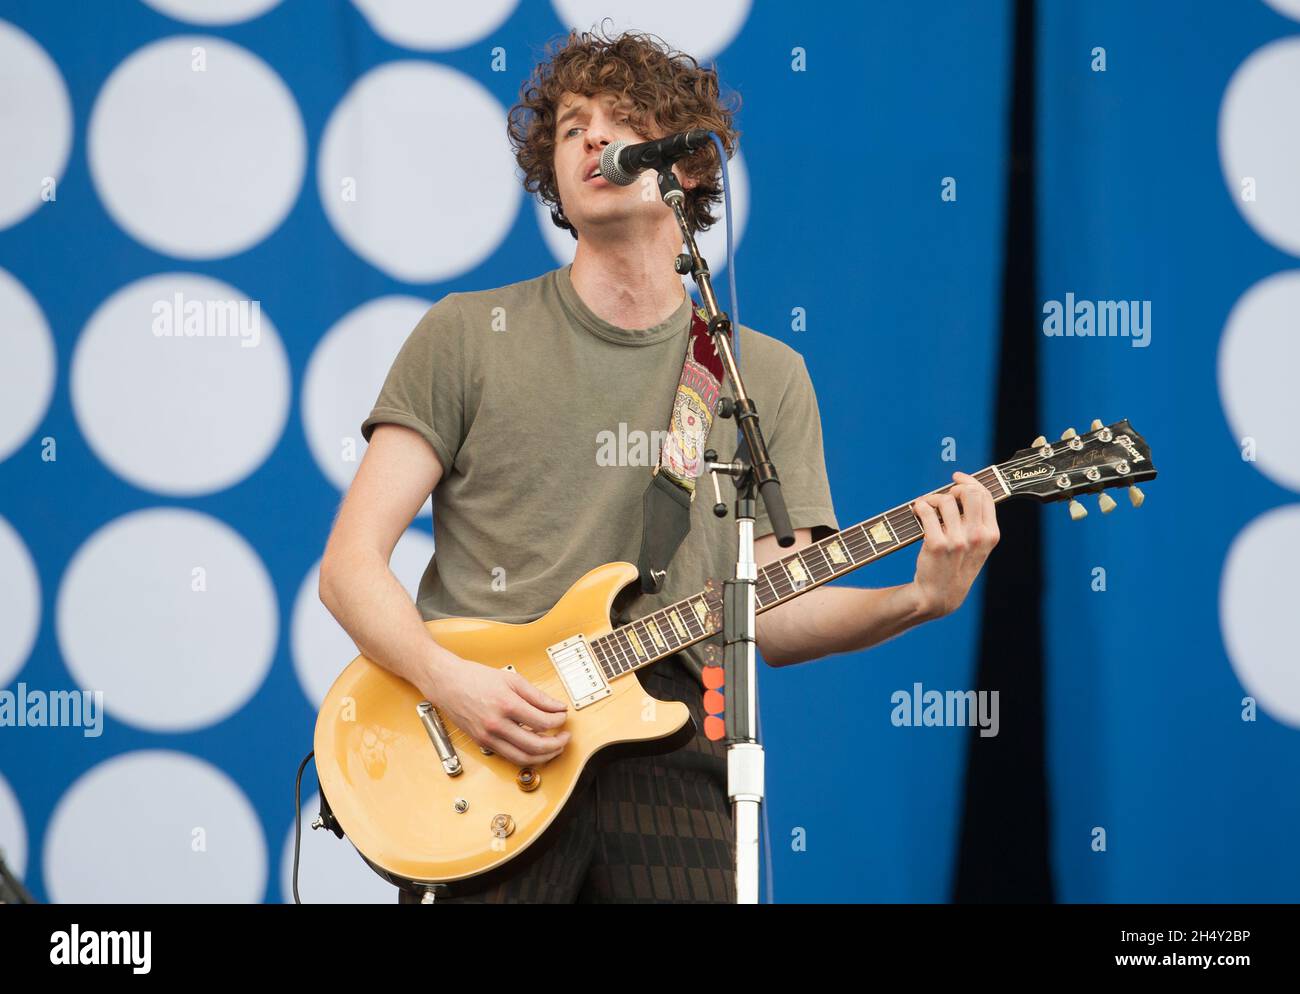 Luke Pritchard of The Kooks performs on stage on day 1 of V Festival on August 22 2015 at Weston Park, Staffordshire, UK Stock Photo